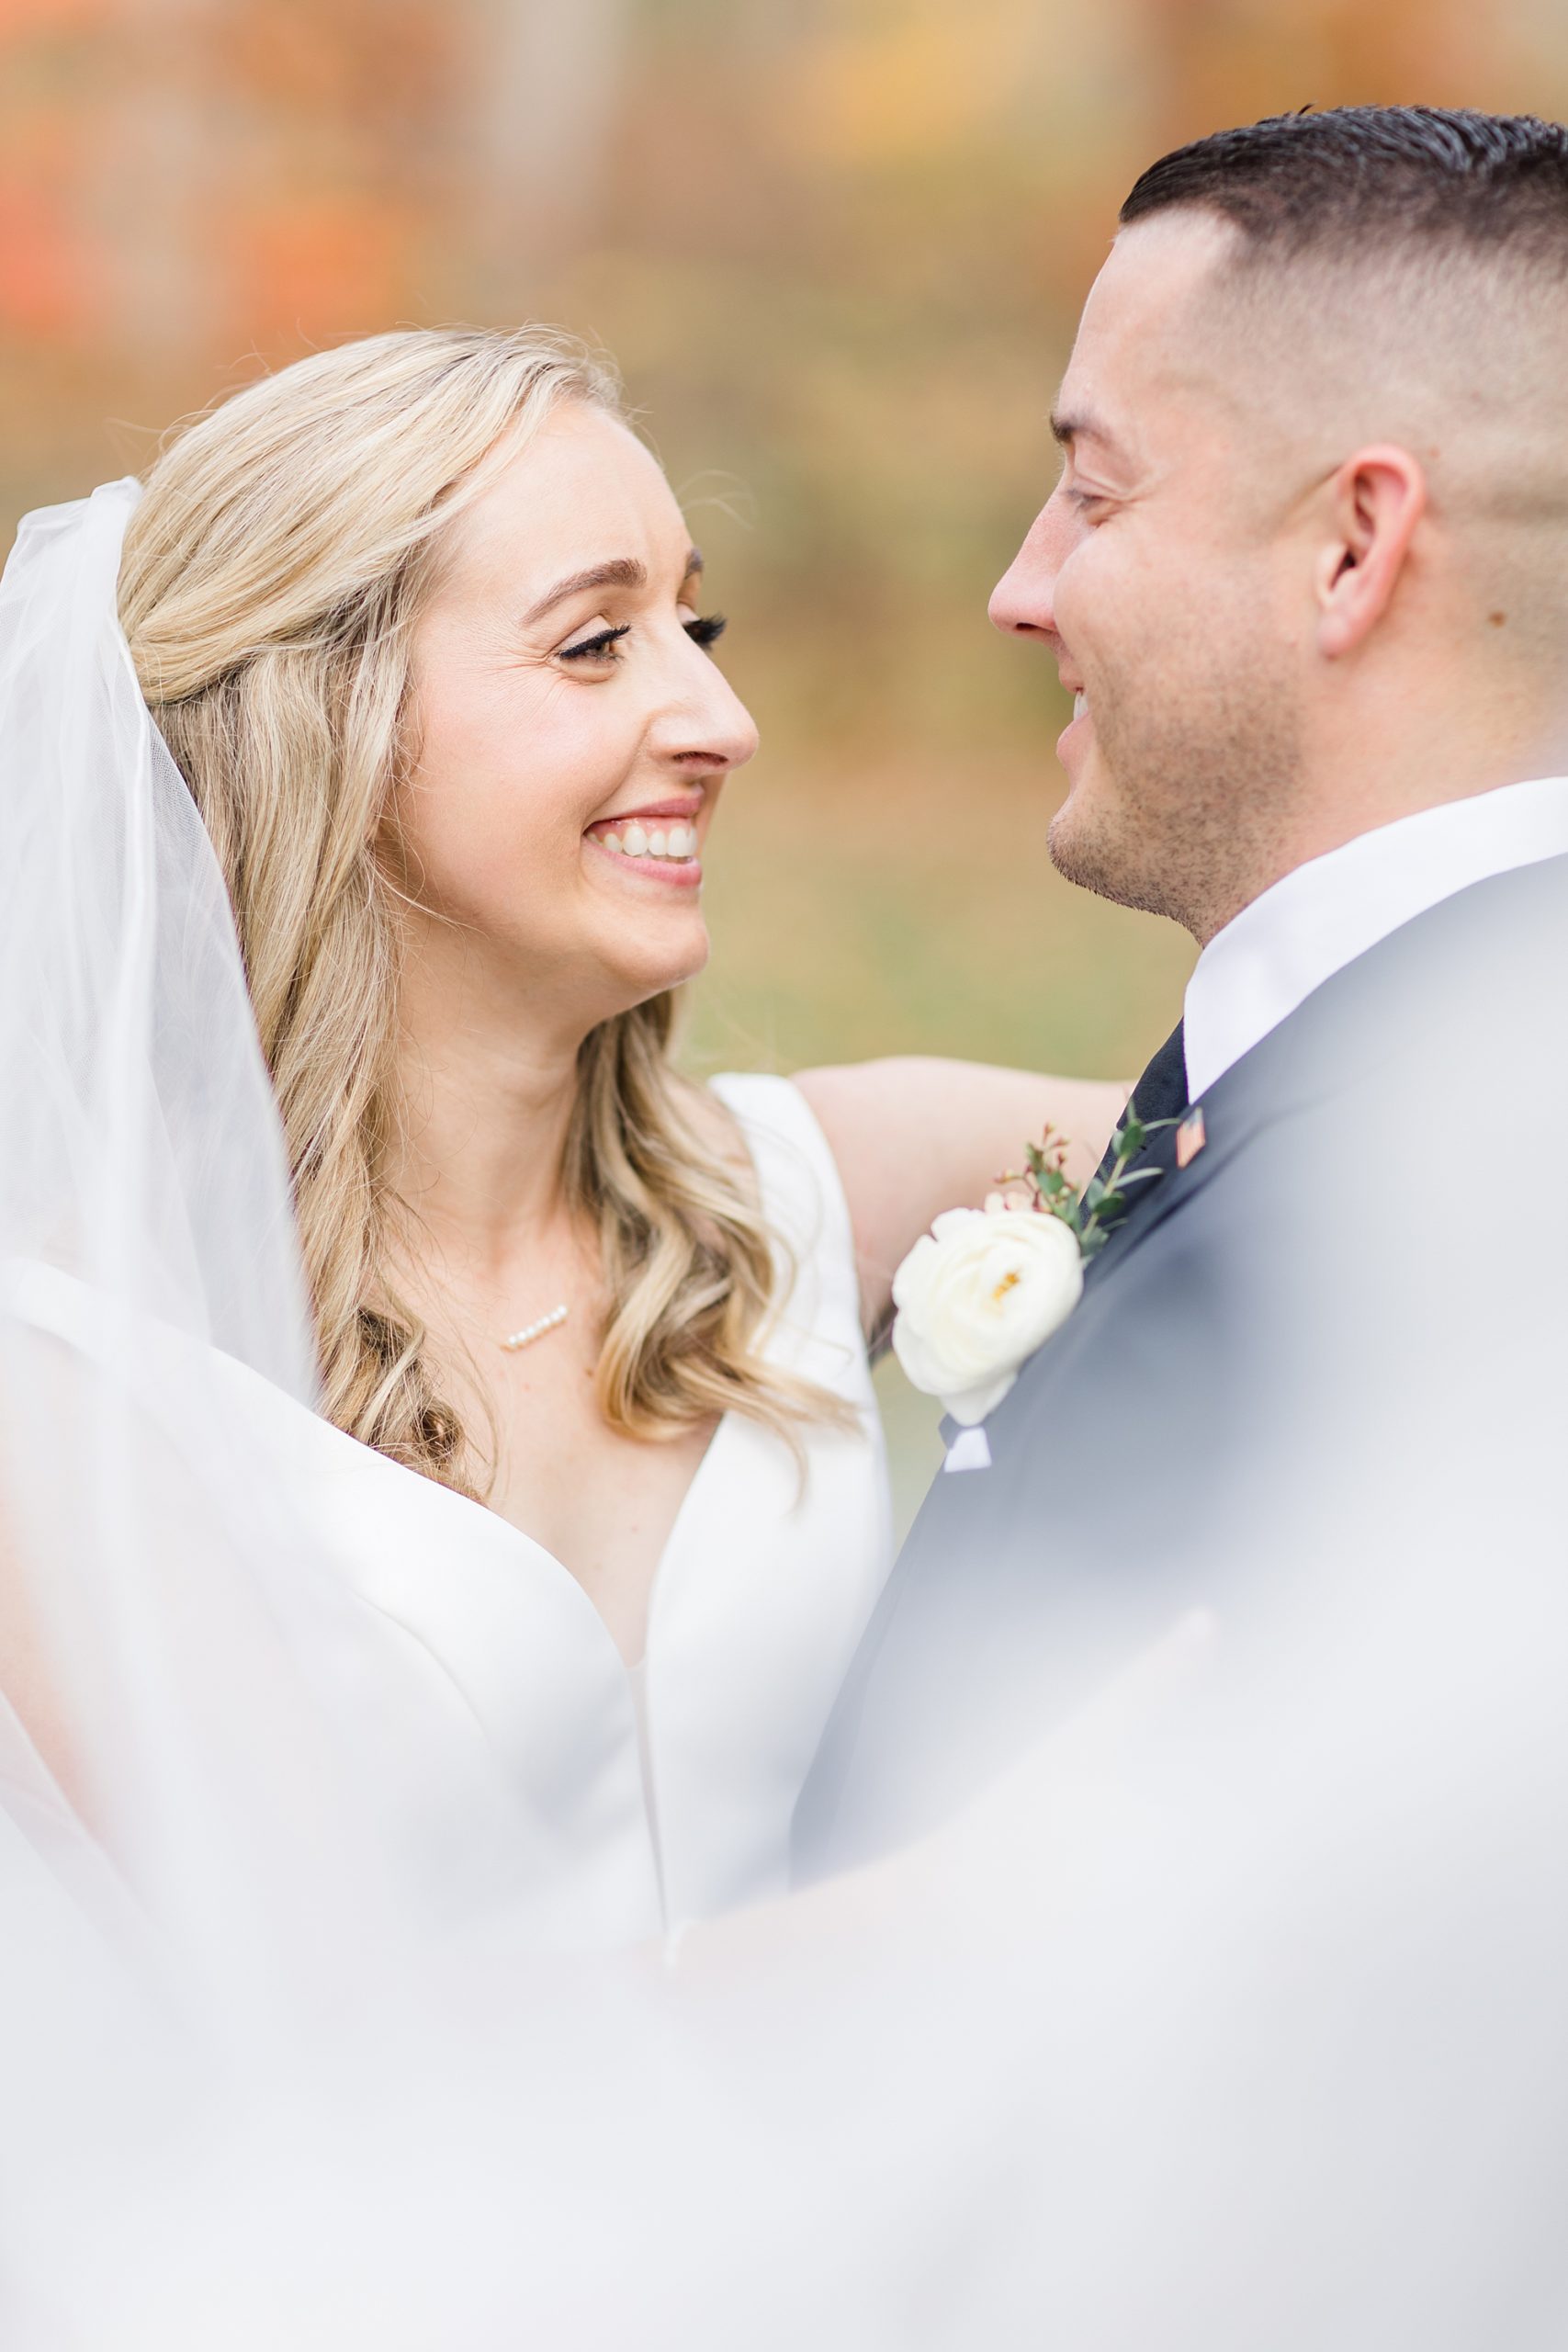 classic wedding portraits from Old Mill Fall Wedding in Rose Valley, PA